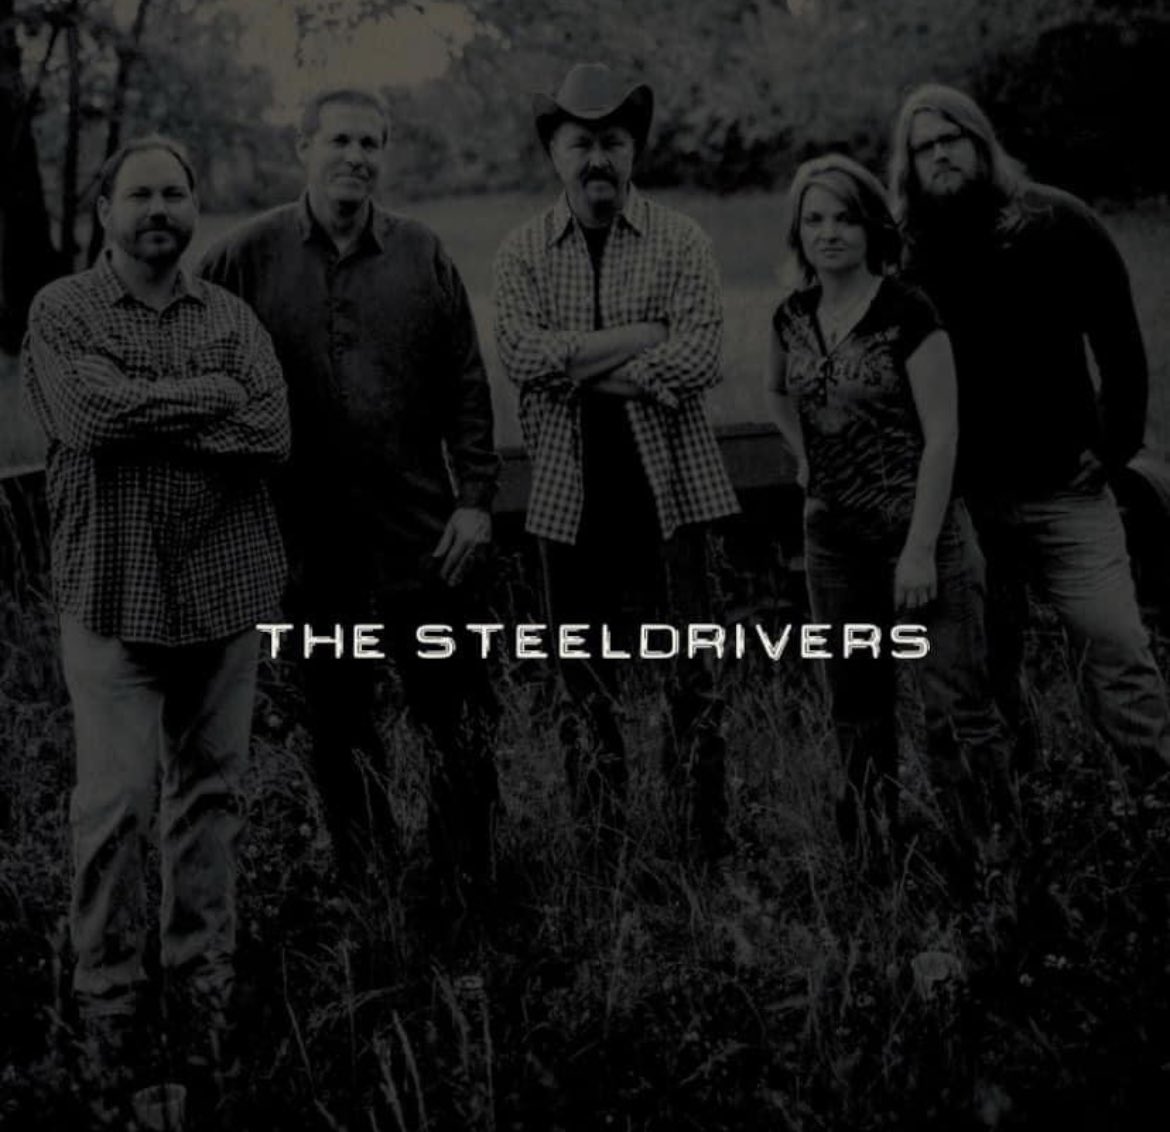 All of us at Rounder are deeply saddened by the passing of Mike Henderson, a founding member of the SteelDrivers, and a brilliant songwriter and musician. Our heartfelt condolences go out to his friends, family, and many fans.